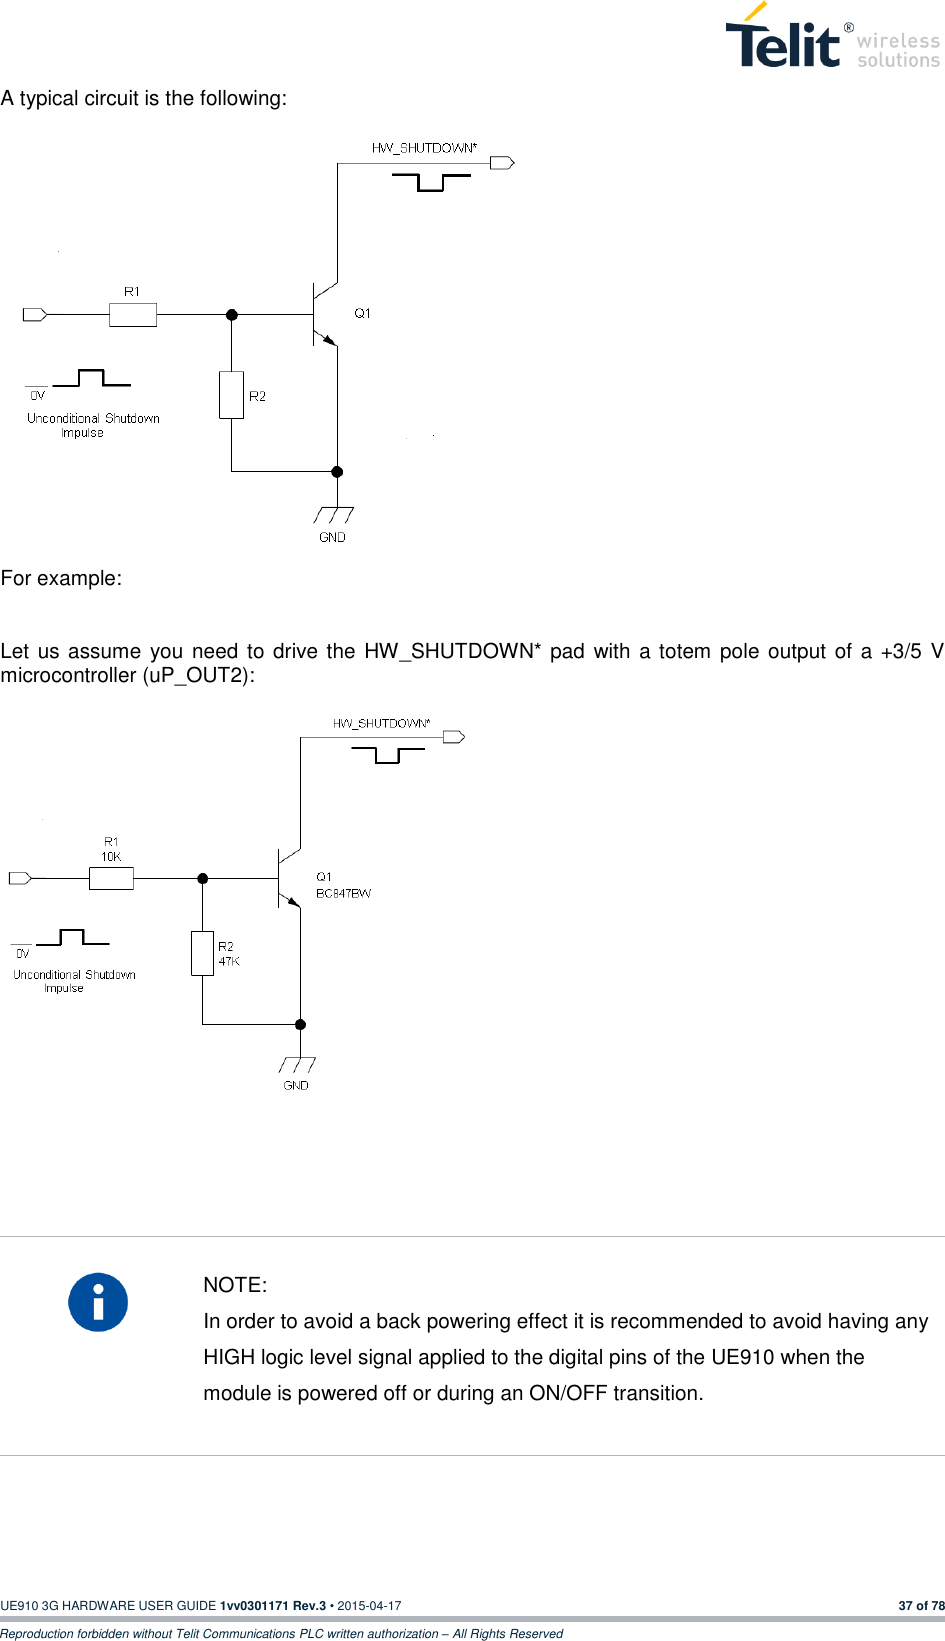  UE910 3G HARDWARE USER GUIDE 1vv0301171 Rev.3 • 2015-04-17 37 of 78 Reproduction forbidden without Telit Communications PLC written authorization – All Rights Reserved  A typical circuit is the following:                         For example:  Let us assume  you need to drive the HW_SHUTDOWN* pad  with  a totem pole output of a  +3/5  V microcontroller (uP_OUT2):                     NOTE: In order to avoid a back powering effect it is recommended to avoid having any HIGH logic level signal applied to the digital pins of the UE910 when the module is powered off or during an ON/OFF transition.     